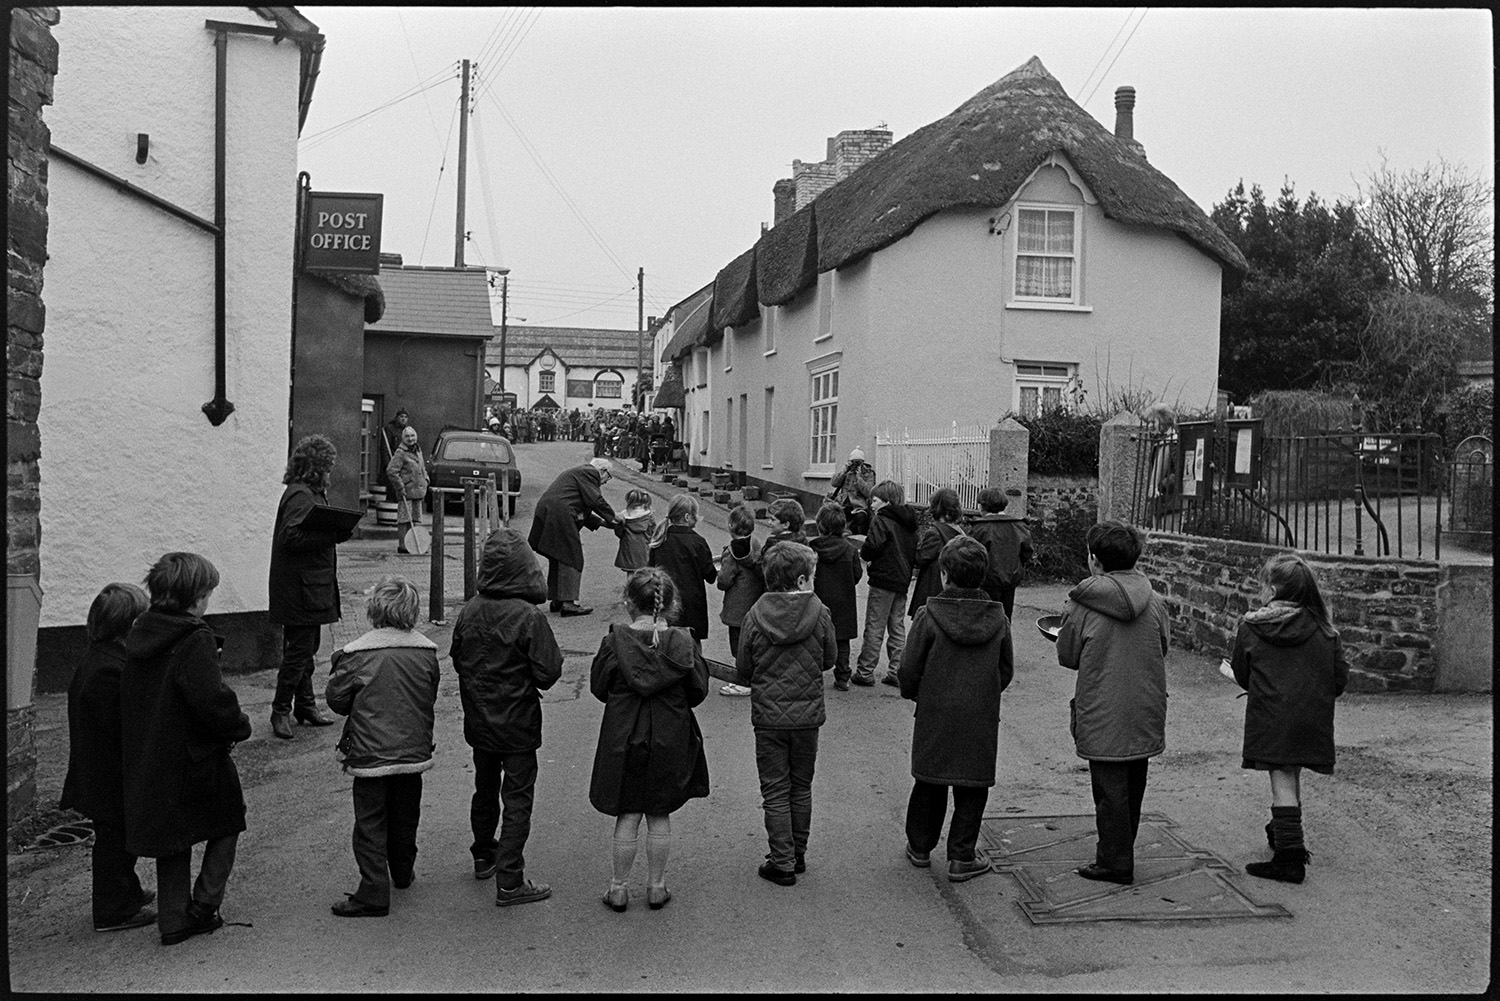 Pancake race in village street, children and spectators. 
[Children lined up in two rows with frying pans ready for a pancake race in Fore Street, Dolton. Spectators are watching from the other end of the street by the Royal Oak pub. Thatched cottages and a Post Office sign can be seen along the street.]